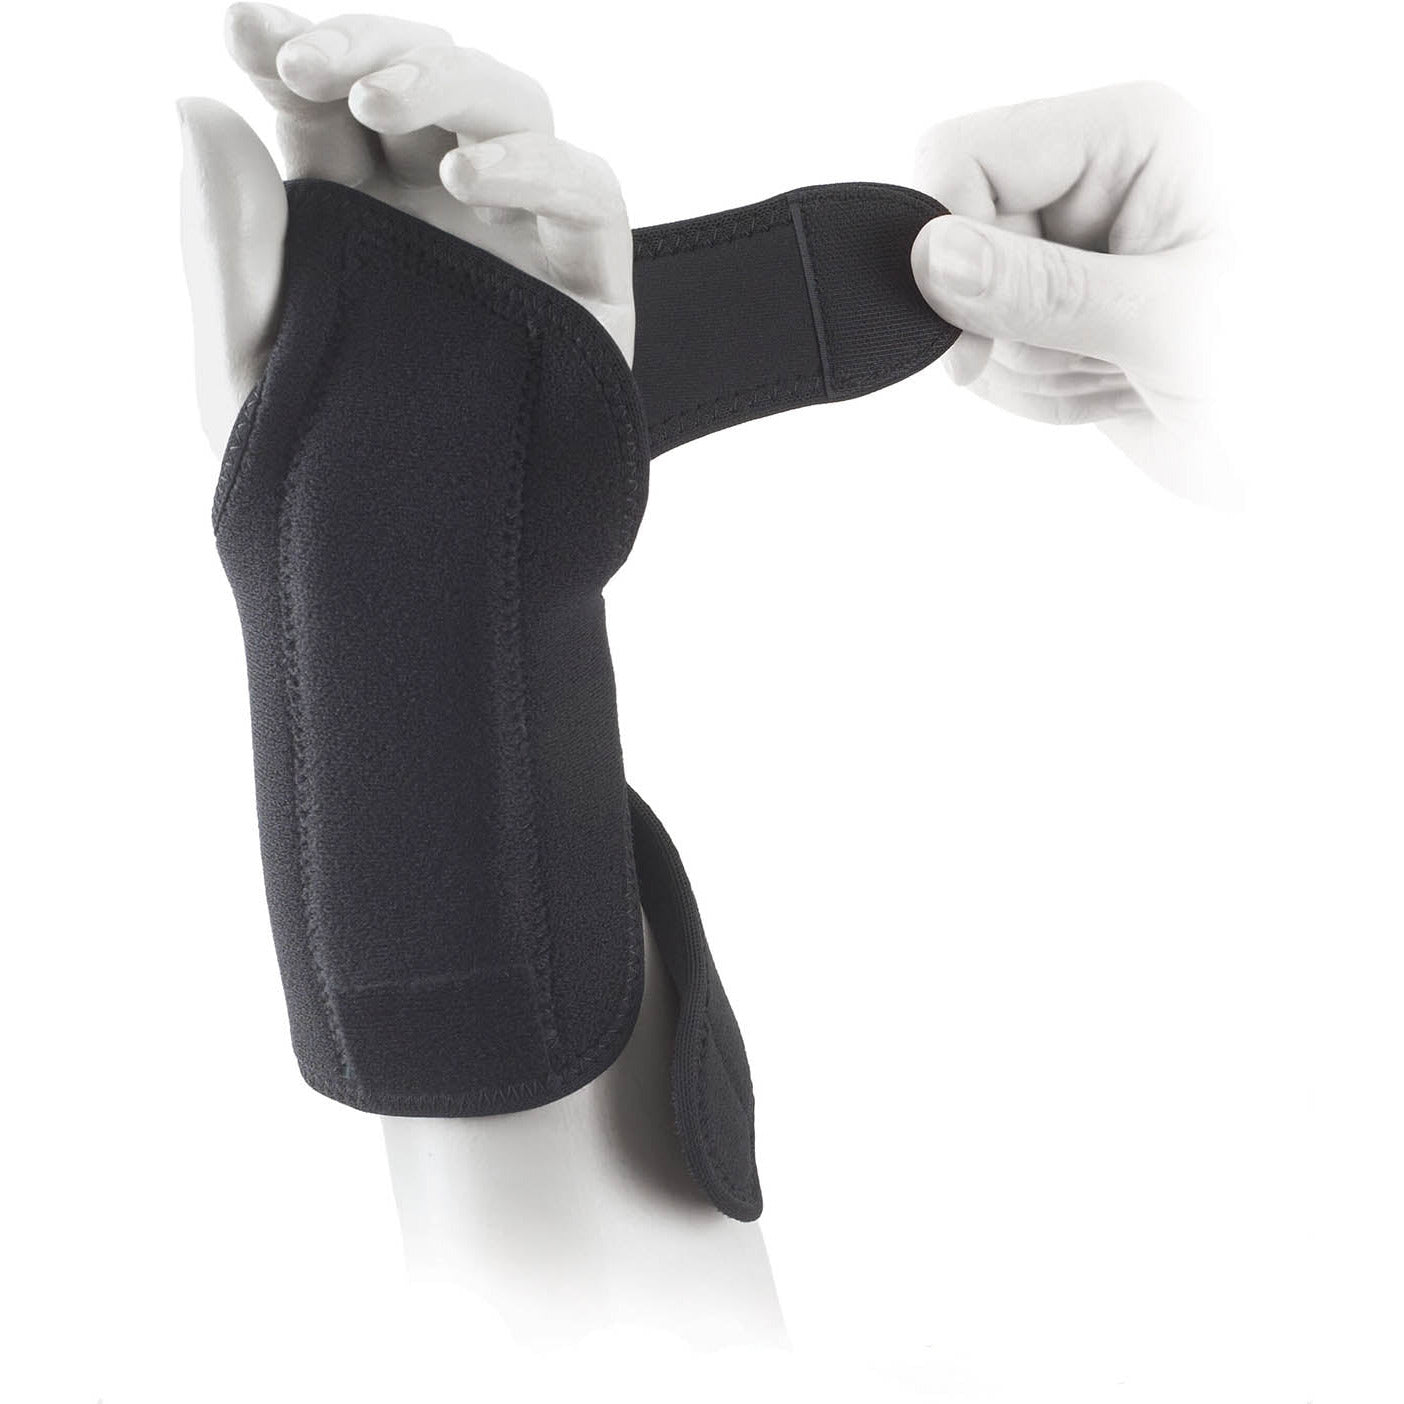 Ultimate Carpel Tunnel Wrist Brace - One size fits all